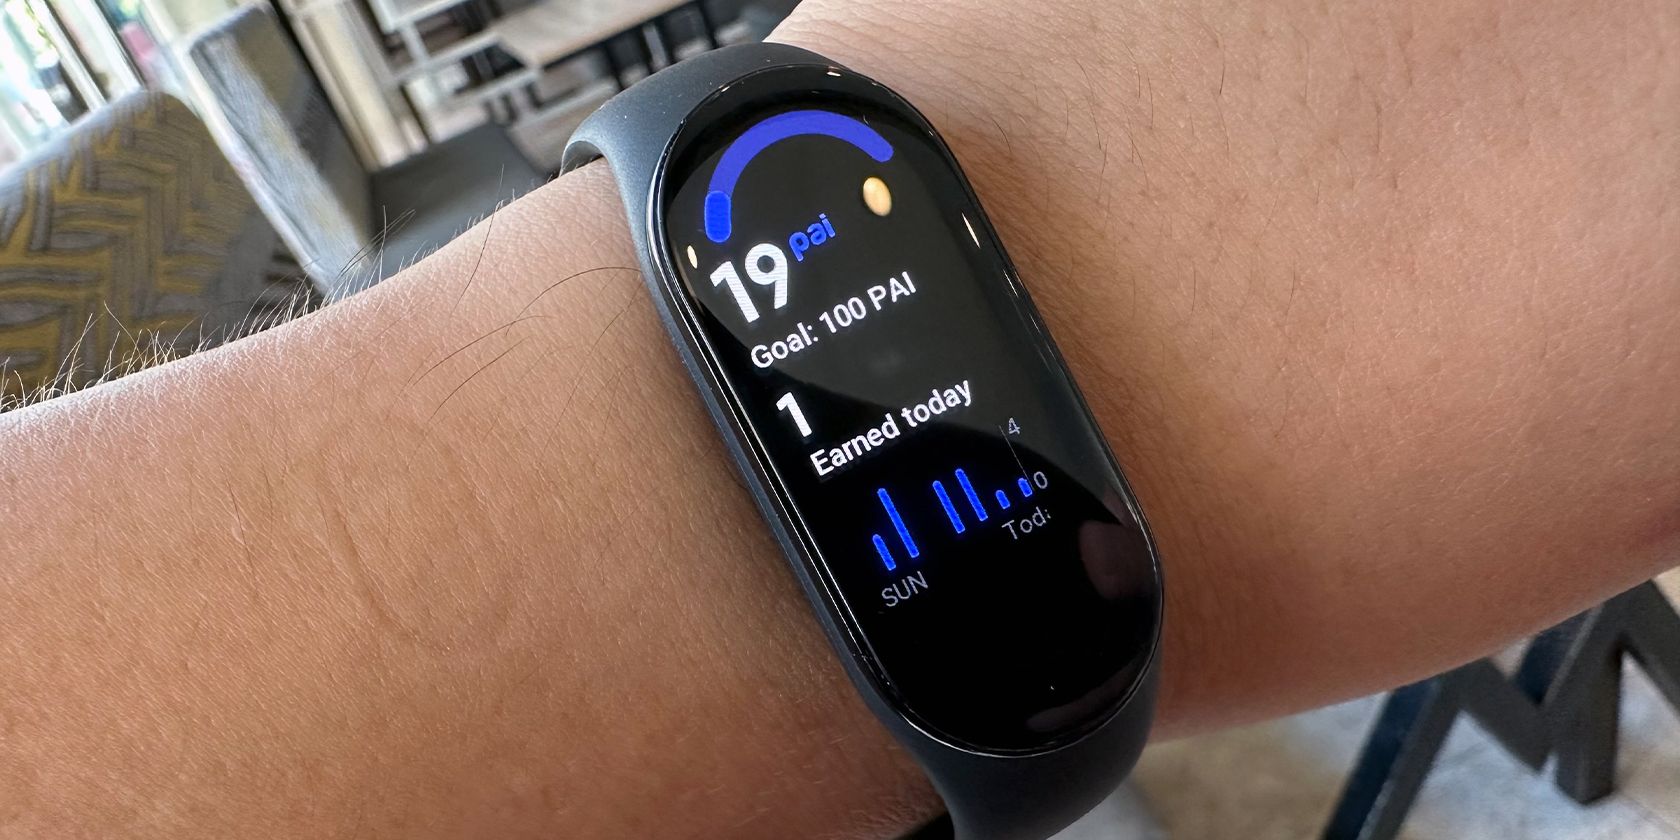 Xiaomi Smart Band 7 Pro is now available in global markets